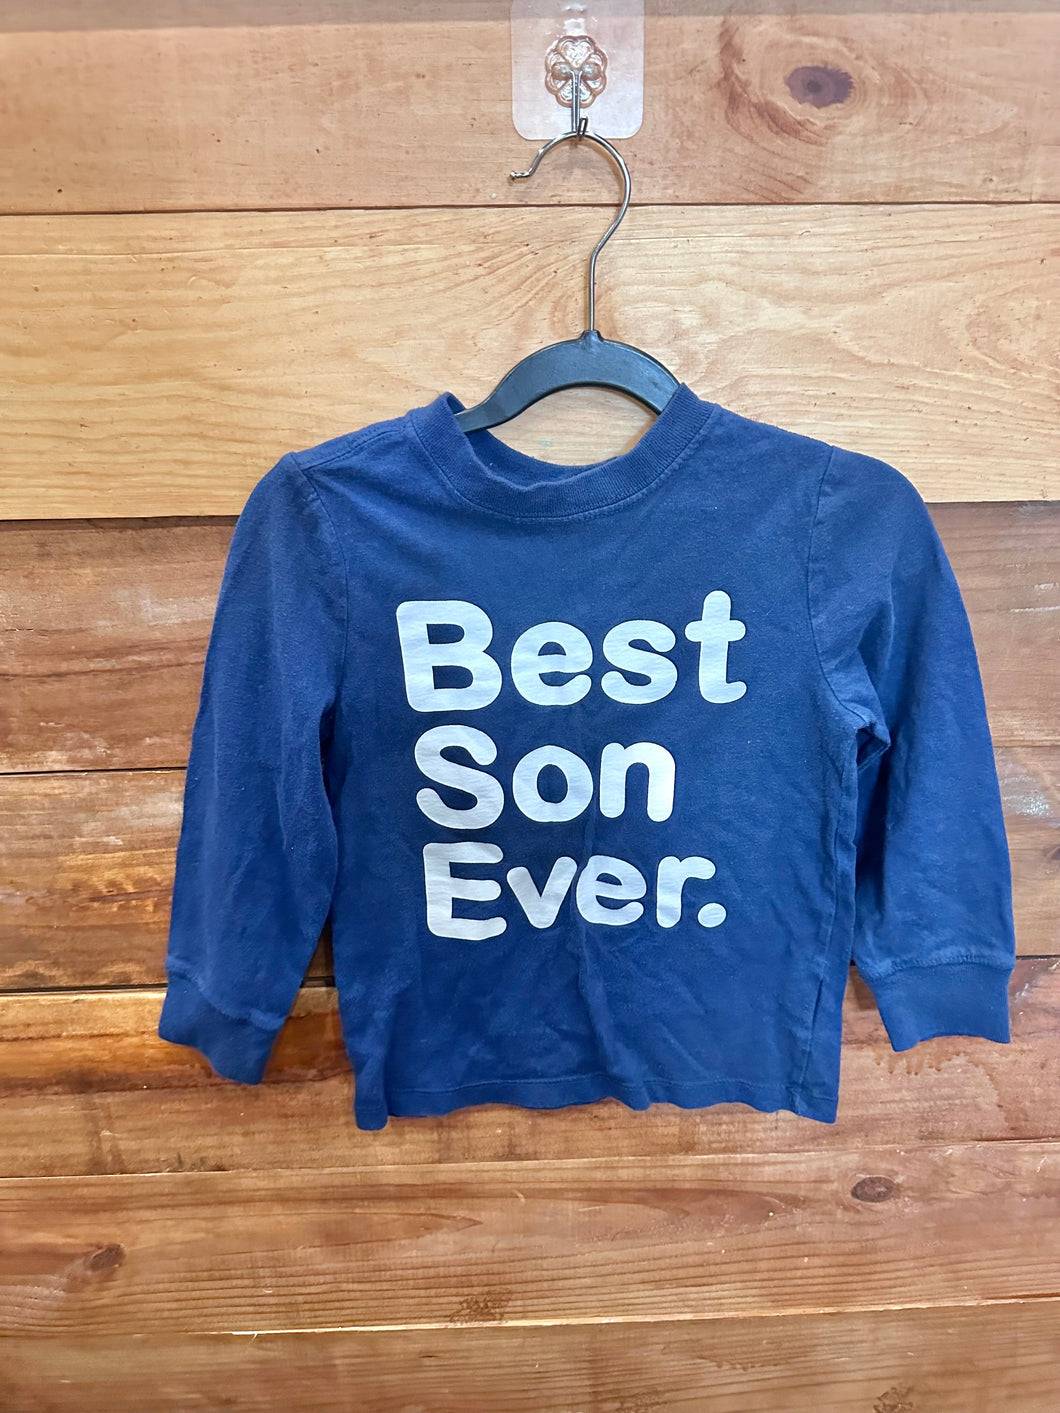 Old Navy Best Son Ever Shirt Size 5T